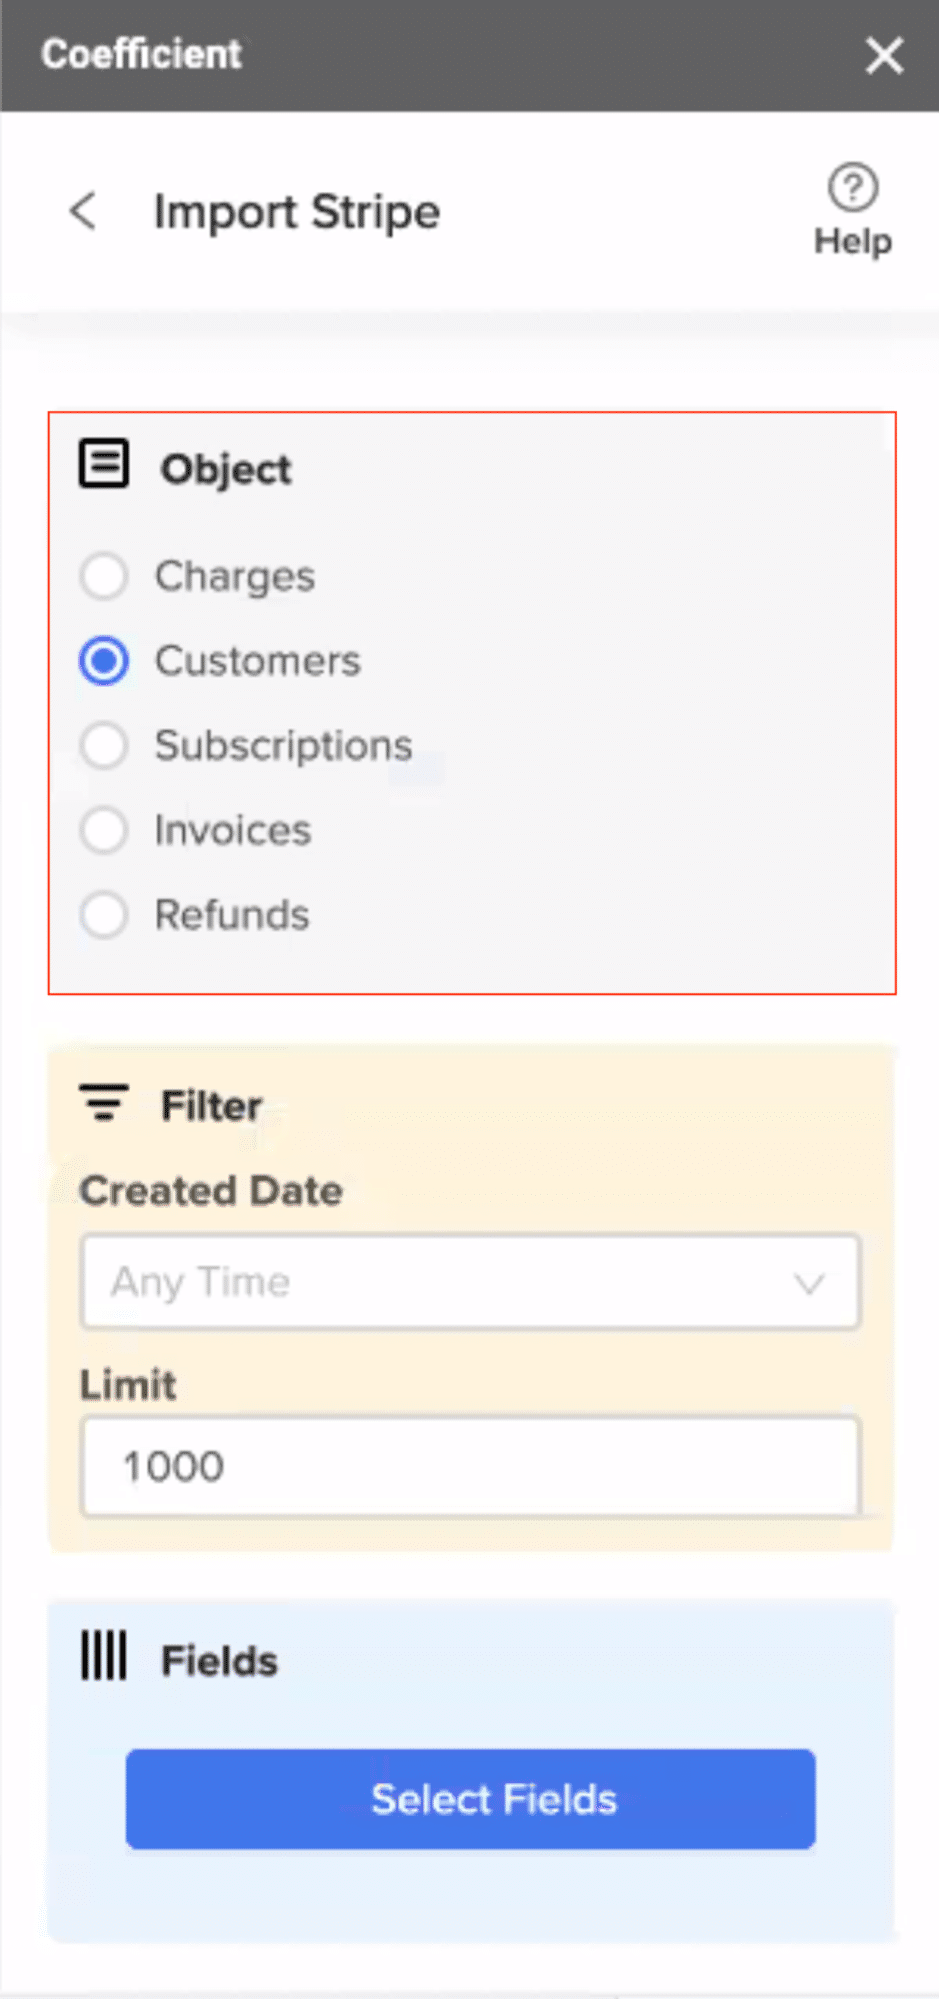 Selecting a specific Stripe account for Coefficient connection